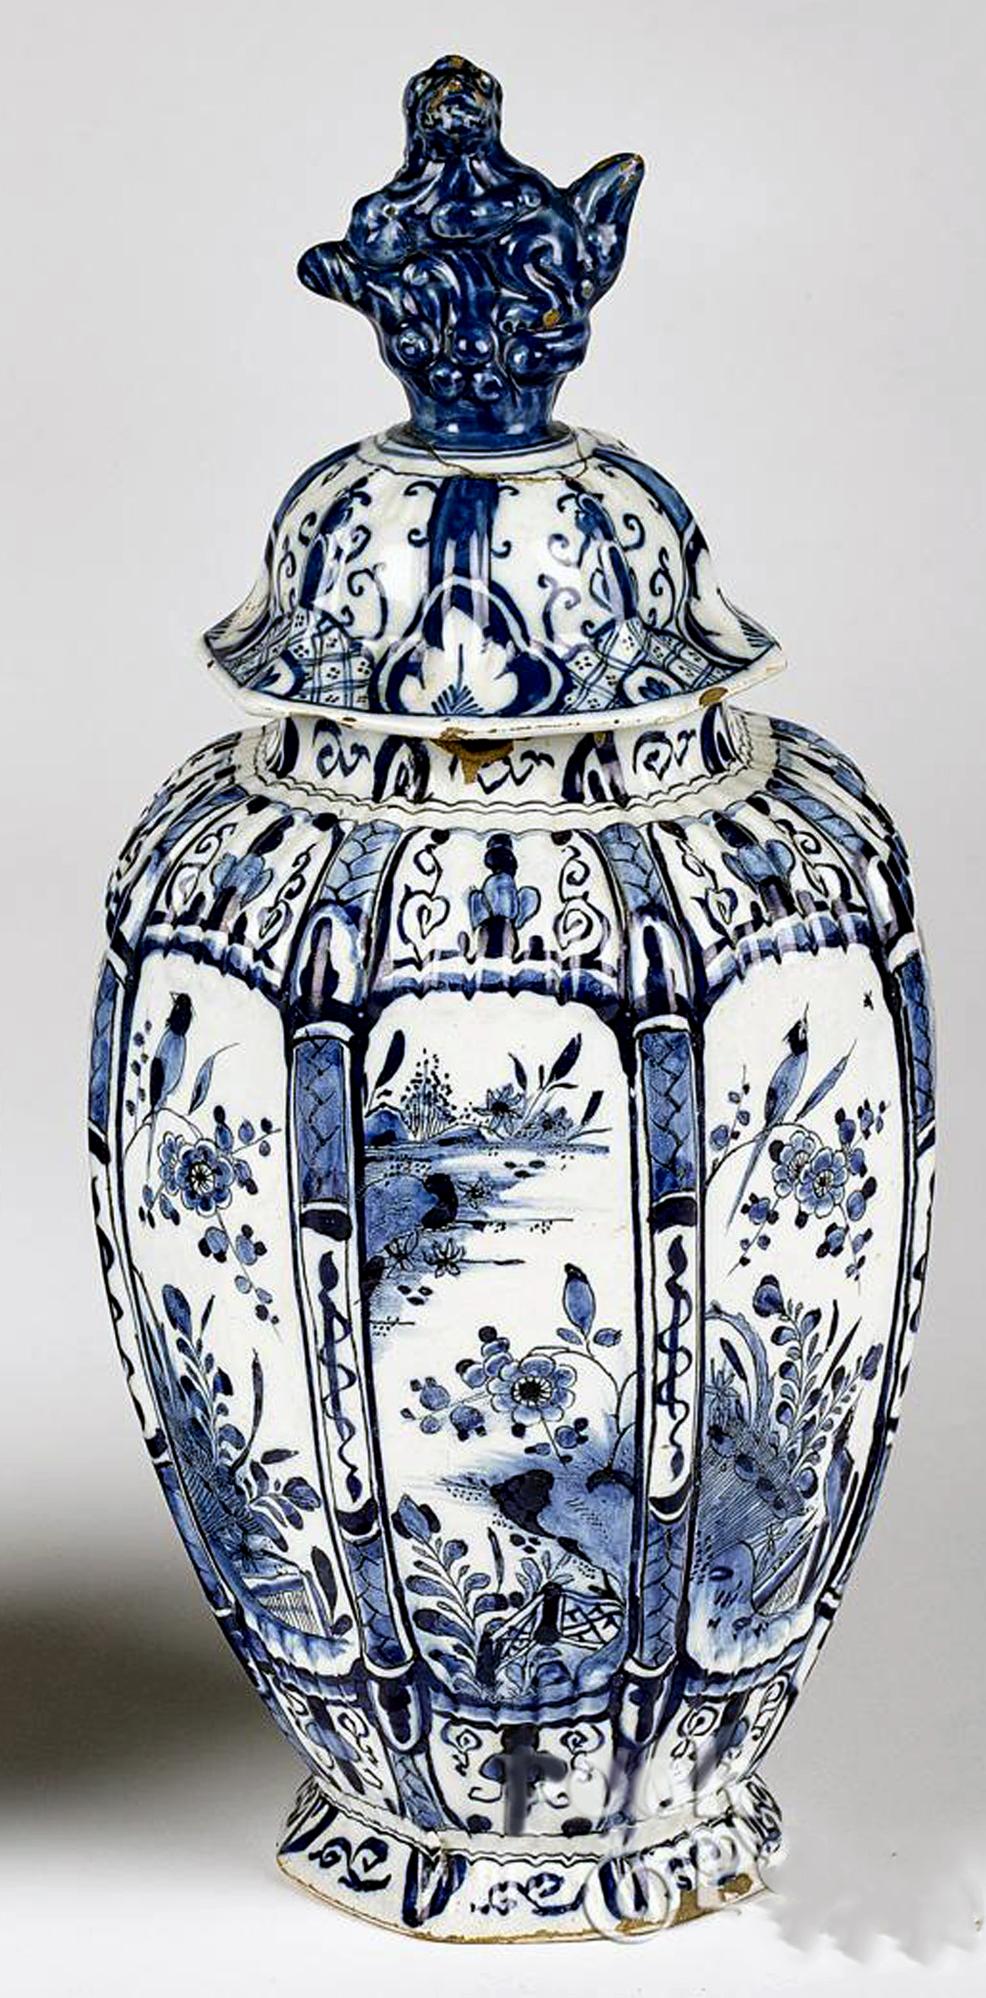 18th Century Dutch Delft Underglaze Blue & White Vases & Covers In Good Condition For Sale In Downingtown, PA